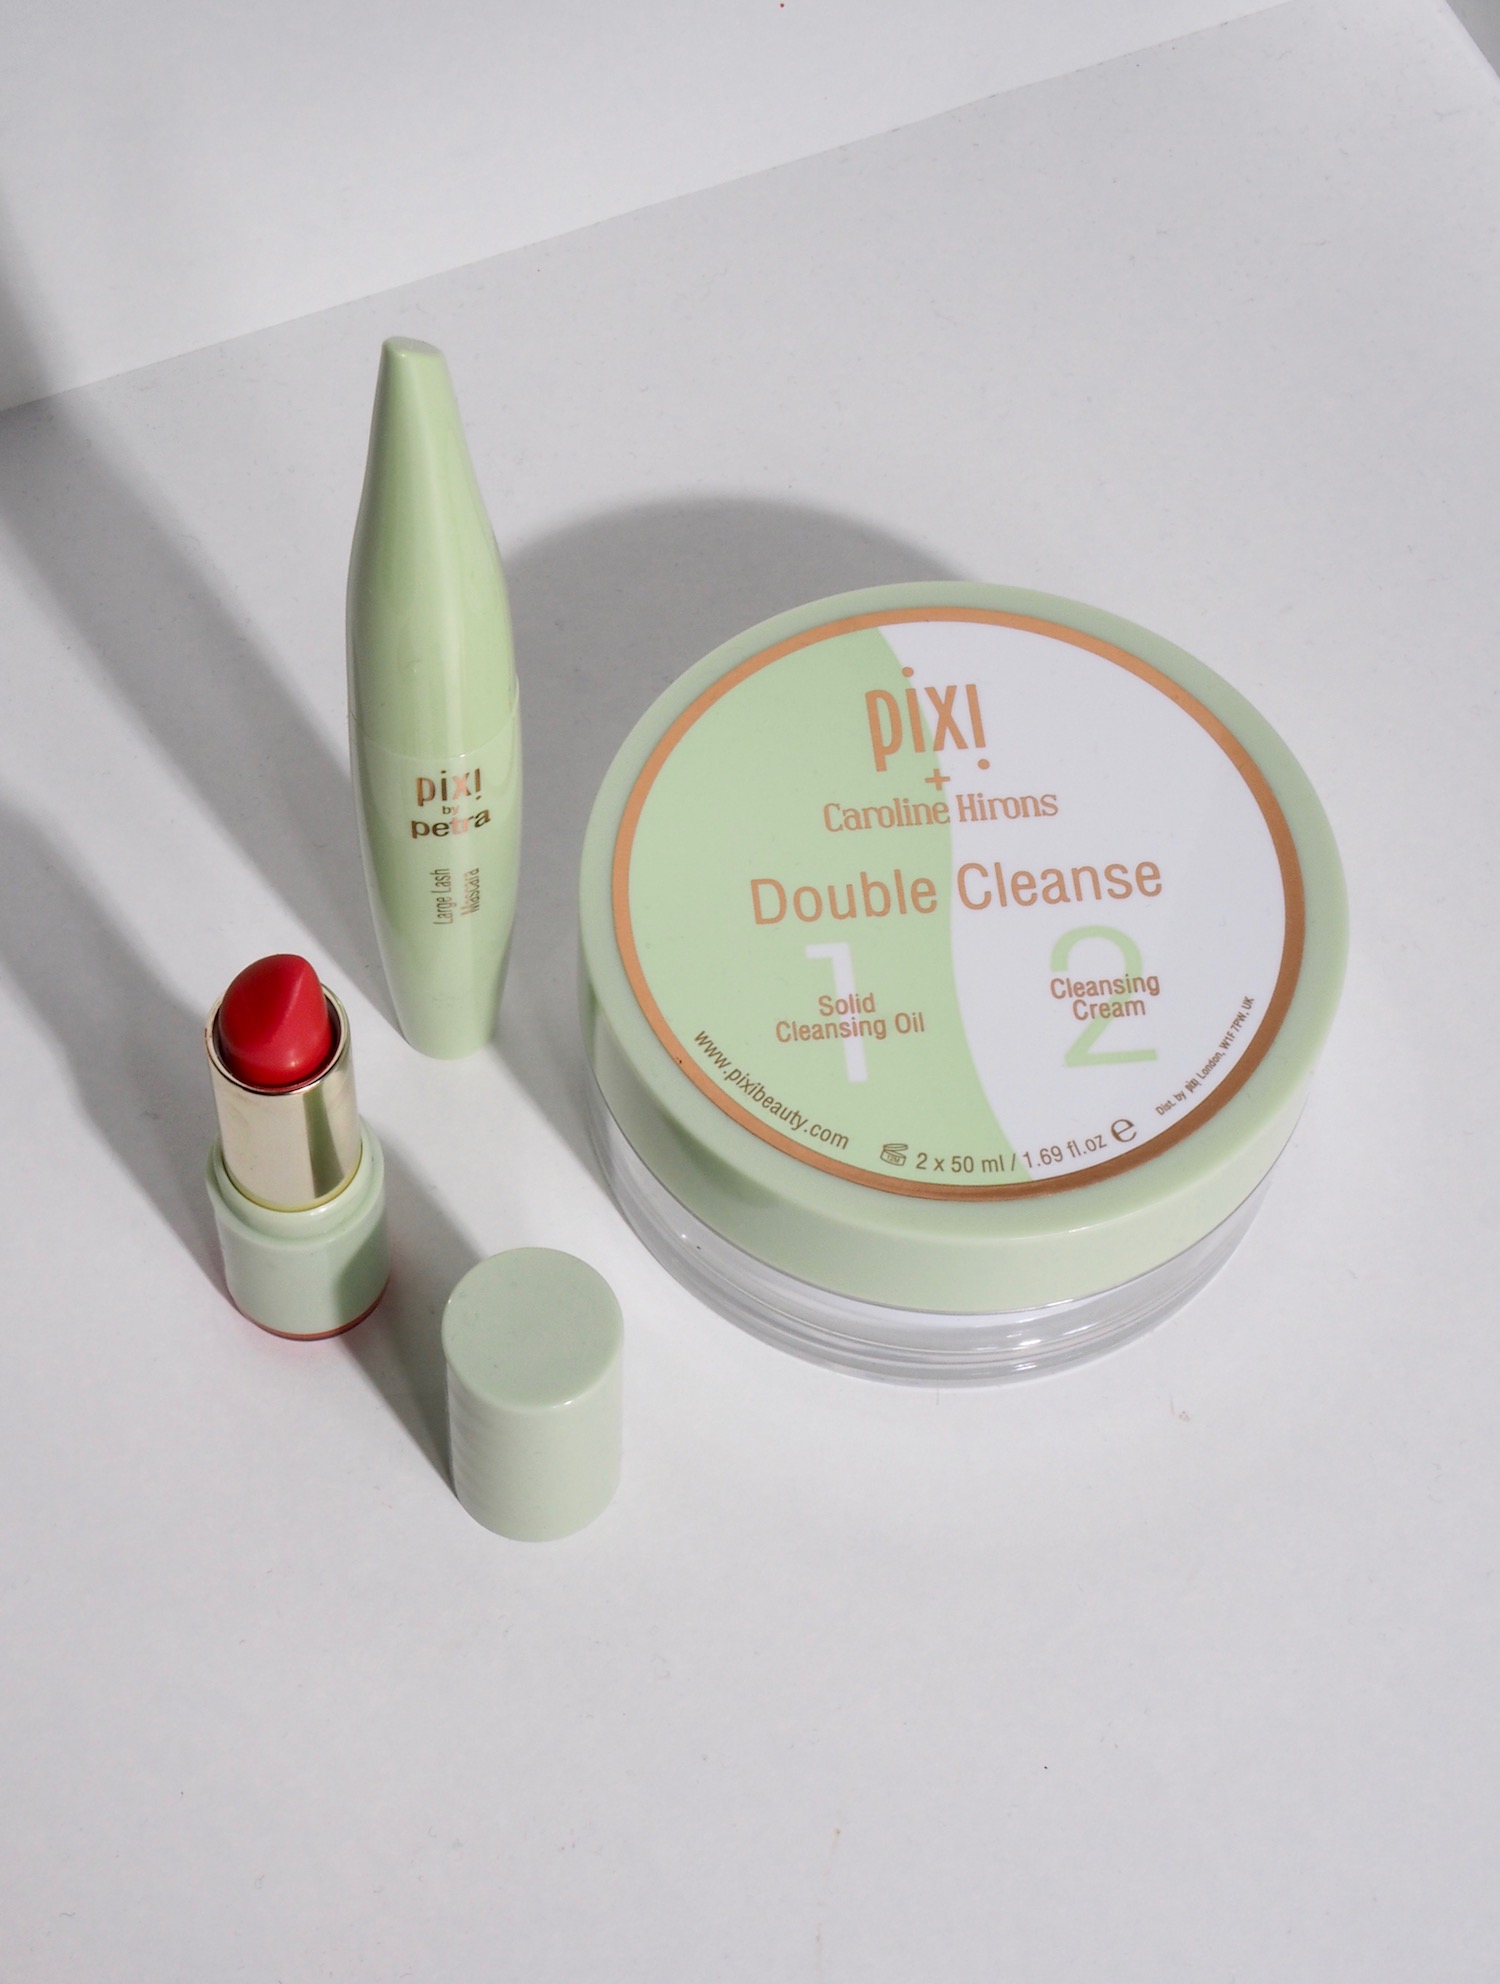 Beautyblog Beautyblogger BARE MINDS Elina Neumann Pixi by Petra Double Cleanse